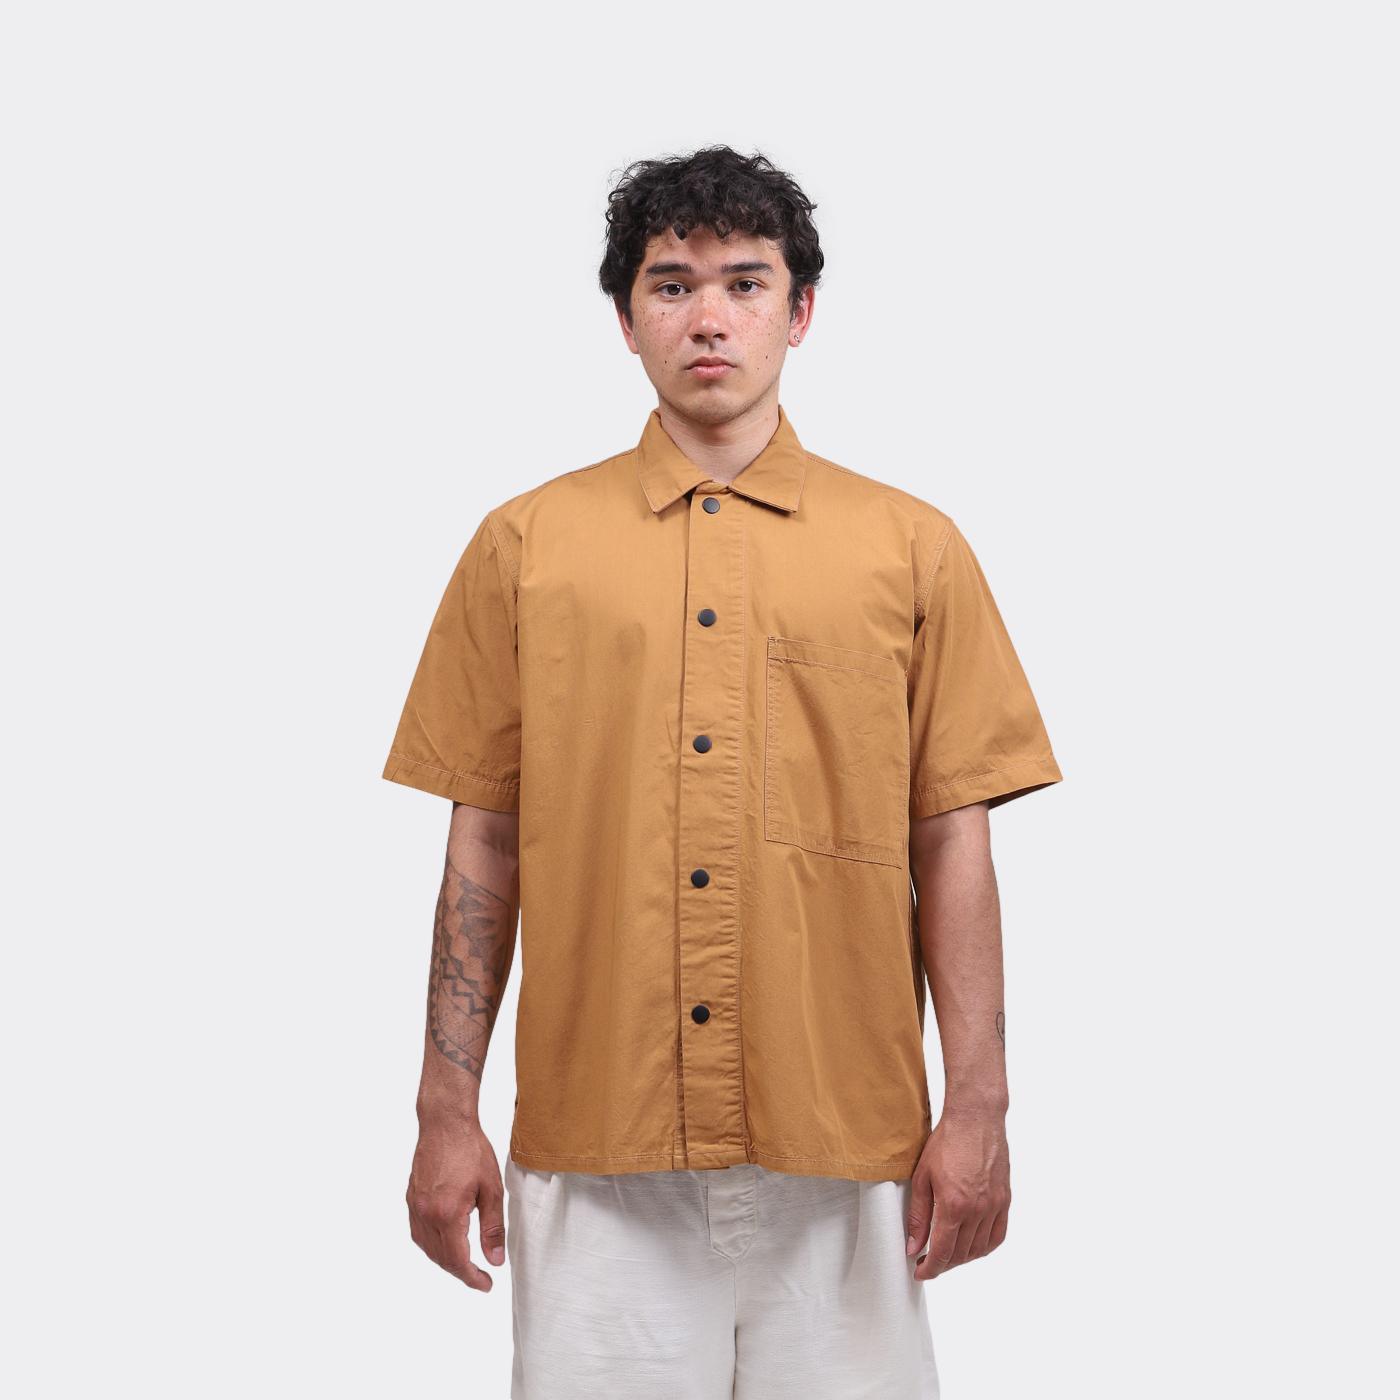 Uskees Lightweight Shirt - Known Source